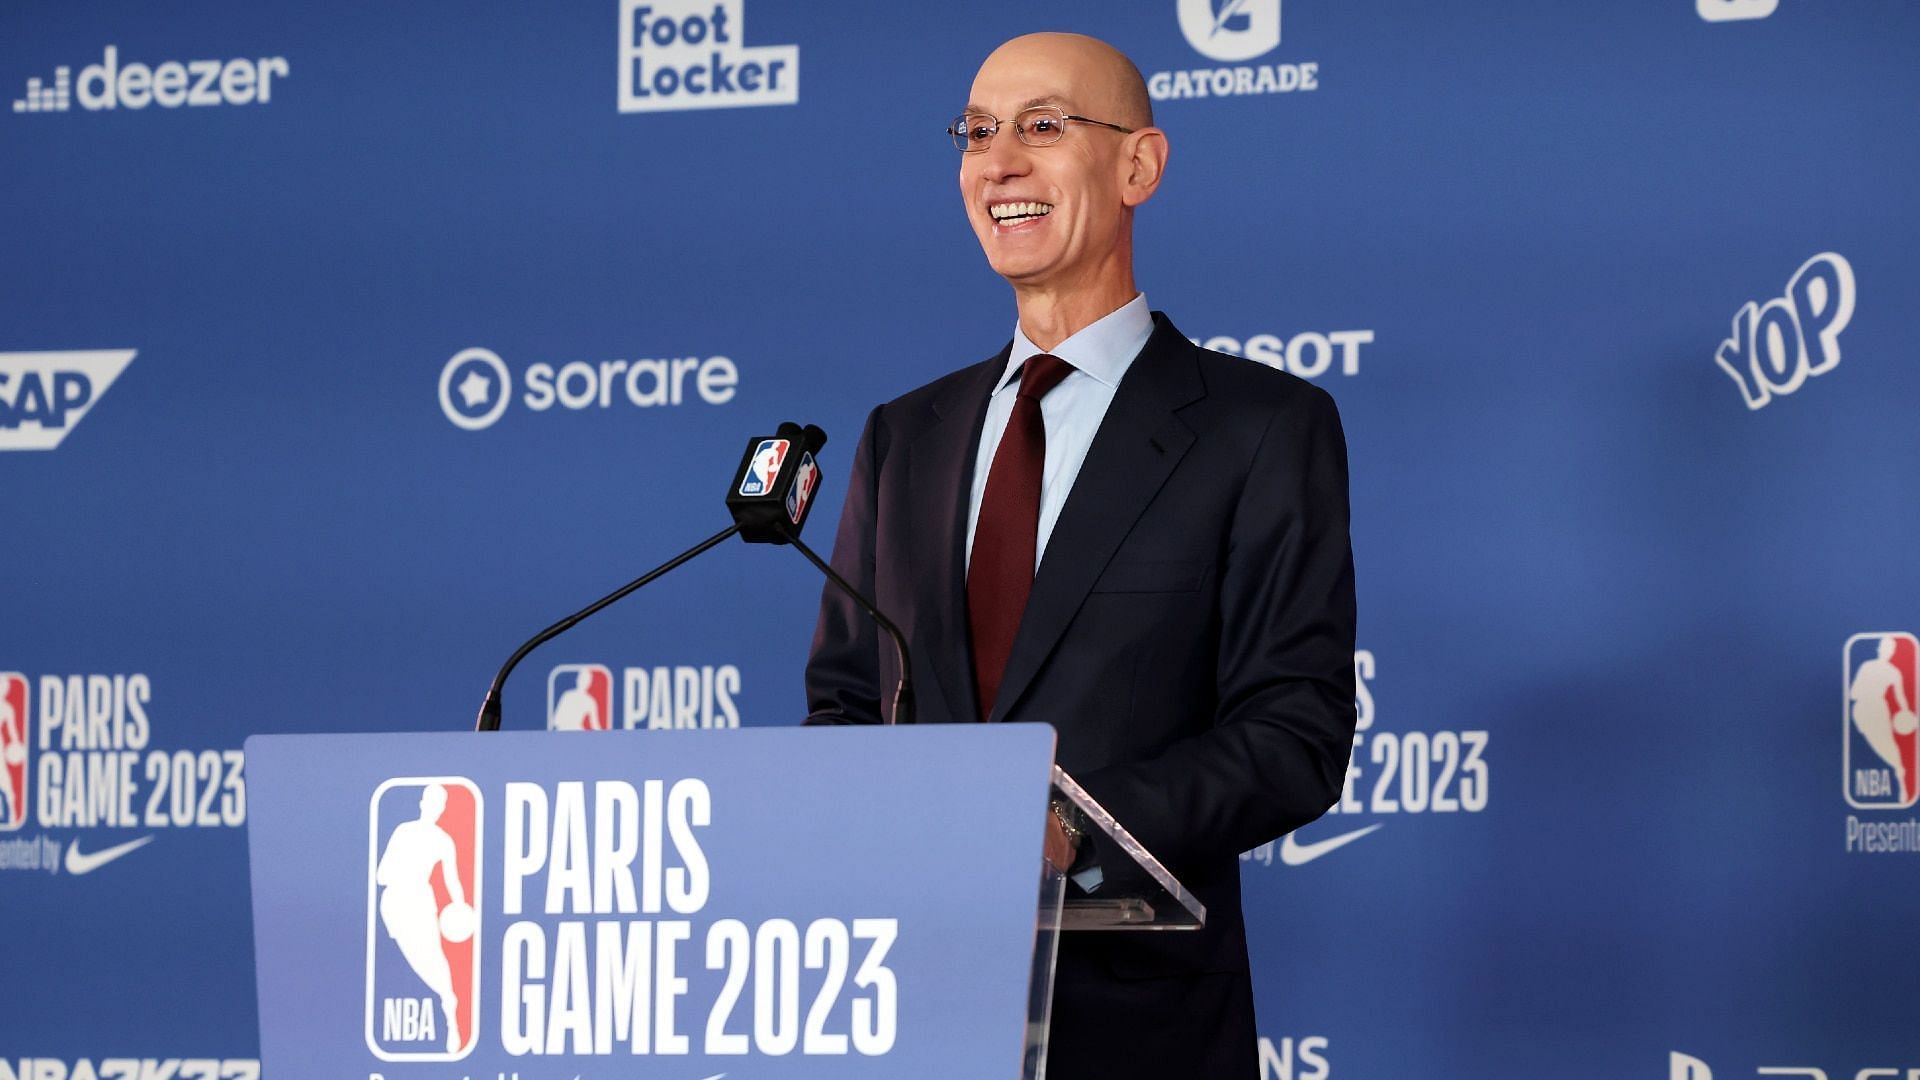 NBA commissioner Adam Silver speaking at a press conference prior to NBA Paris Game 2023